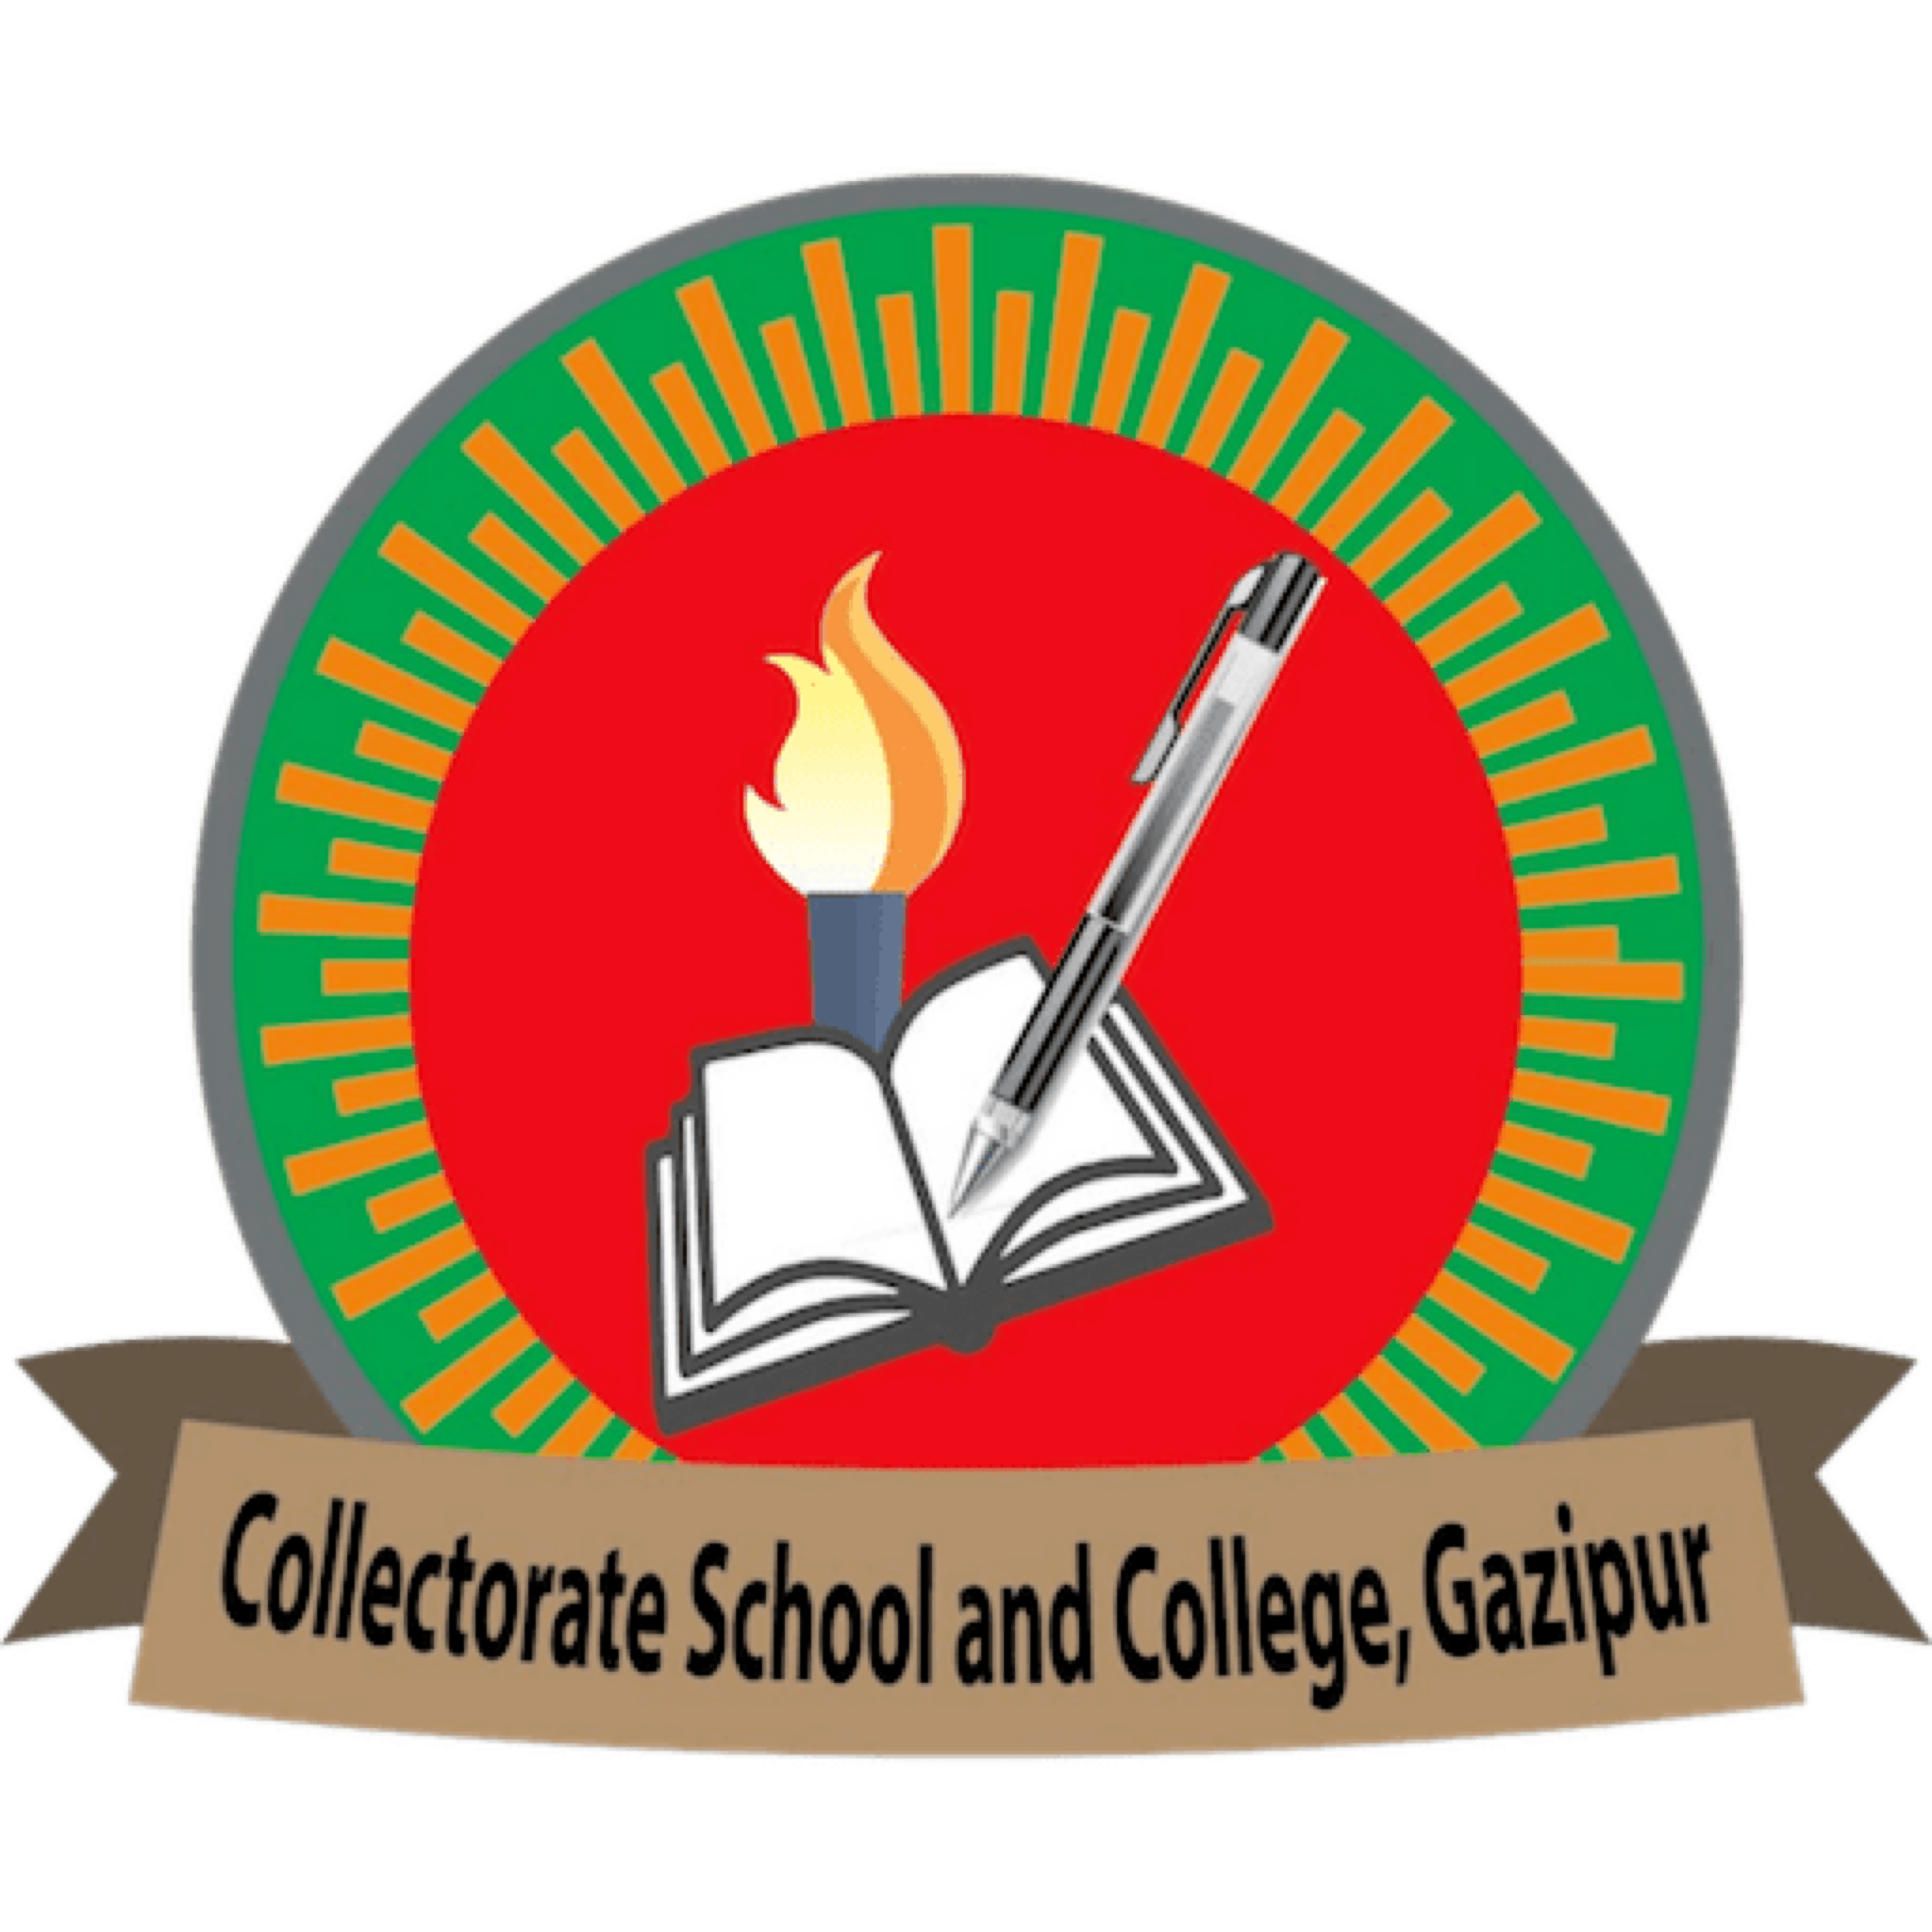 Collectorate School and College, Gazipur